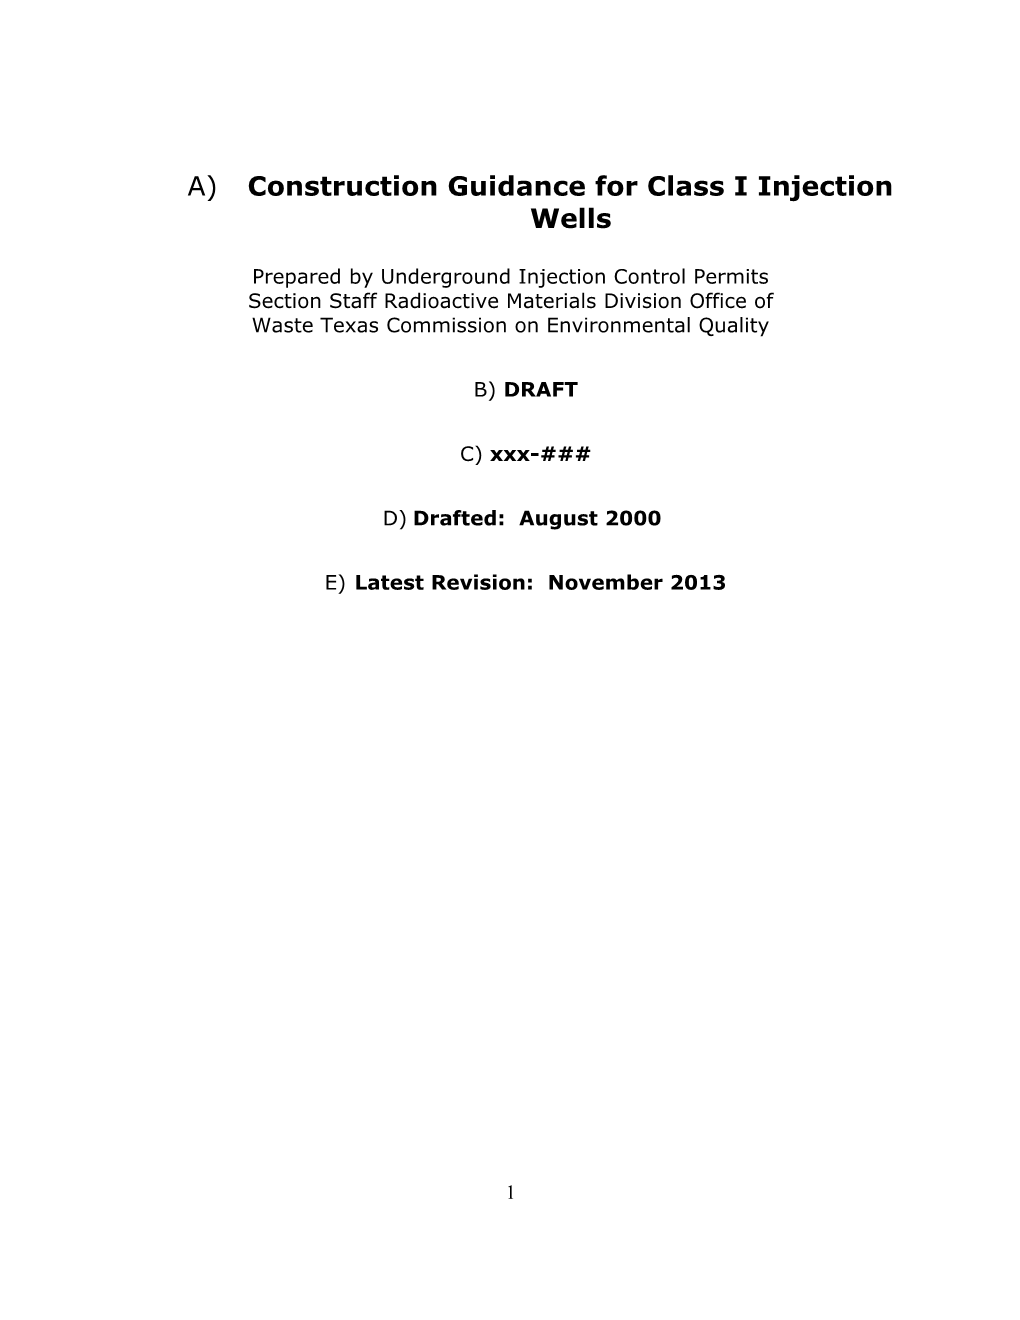 Construction Guidance for Class I Injection Wells